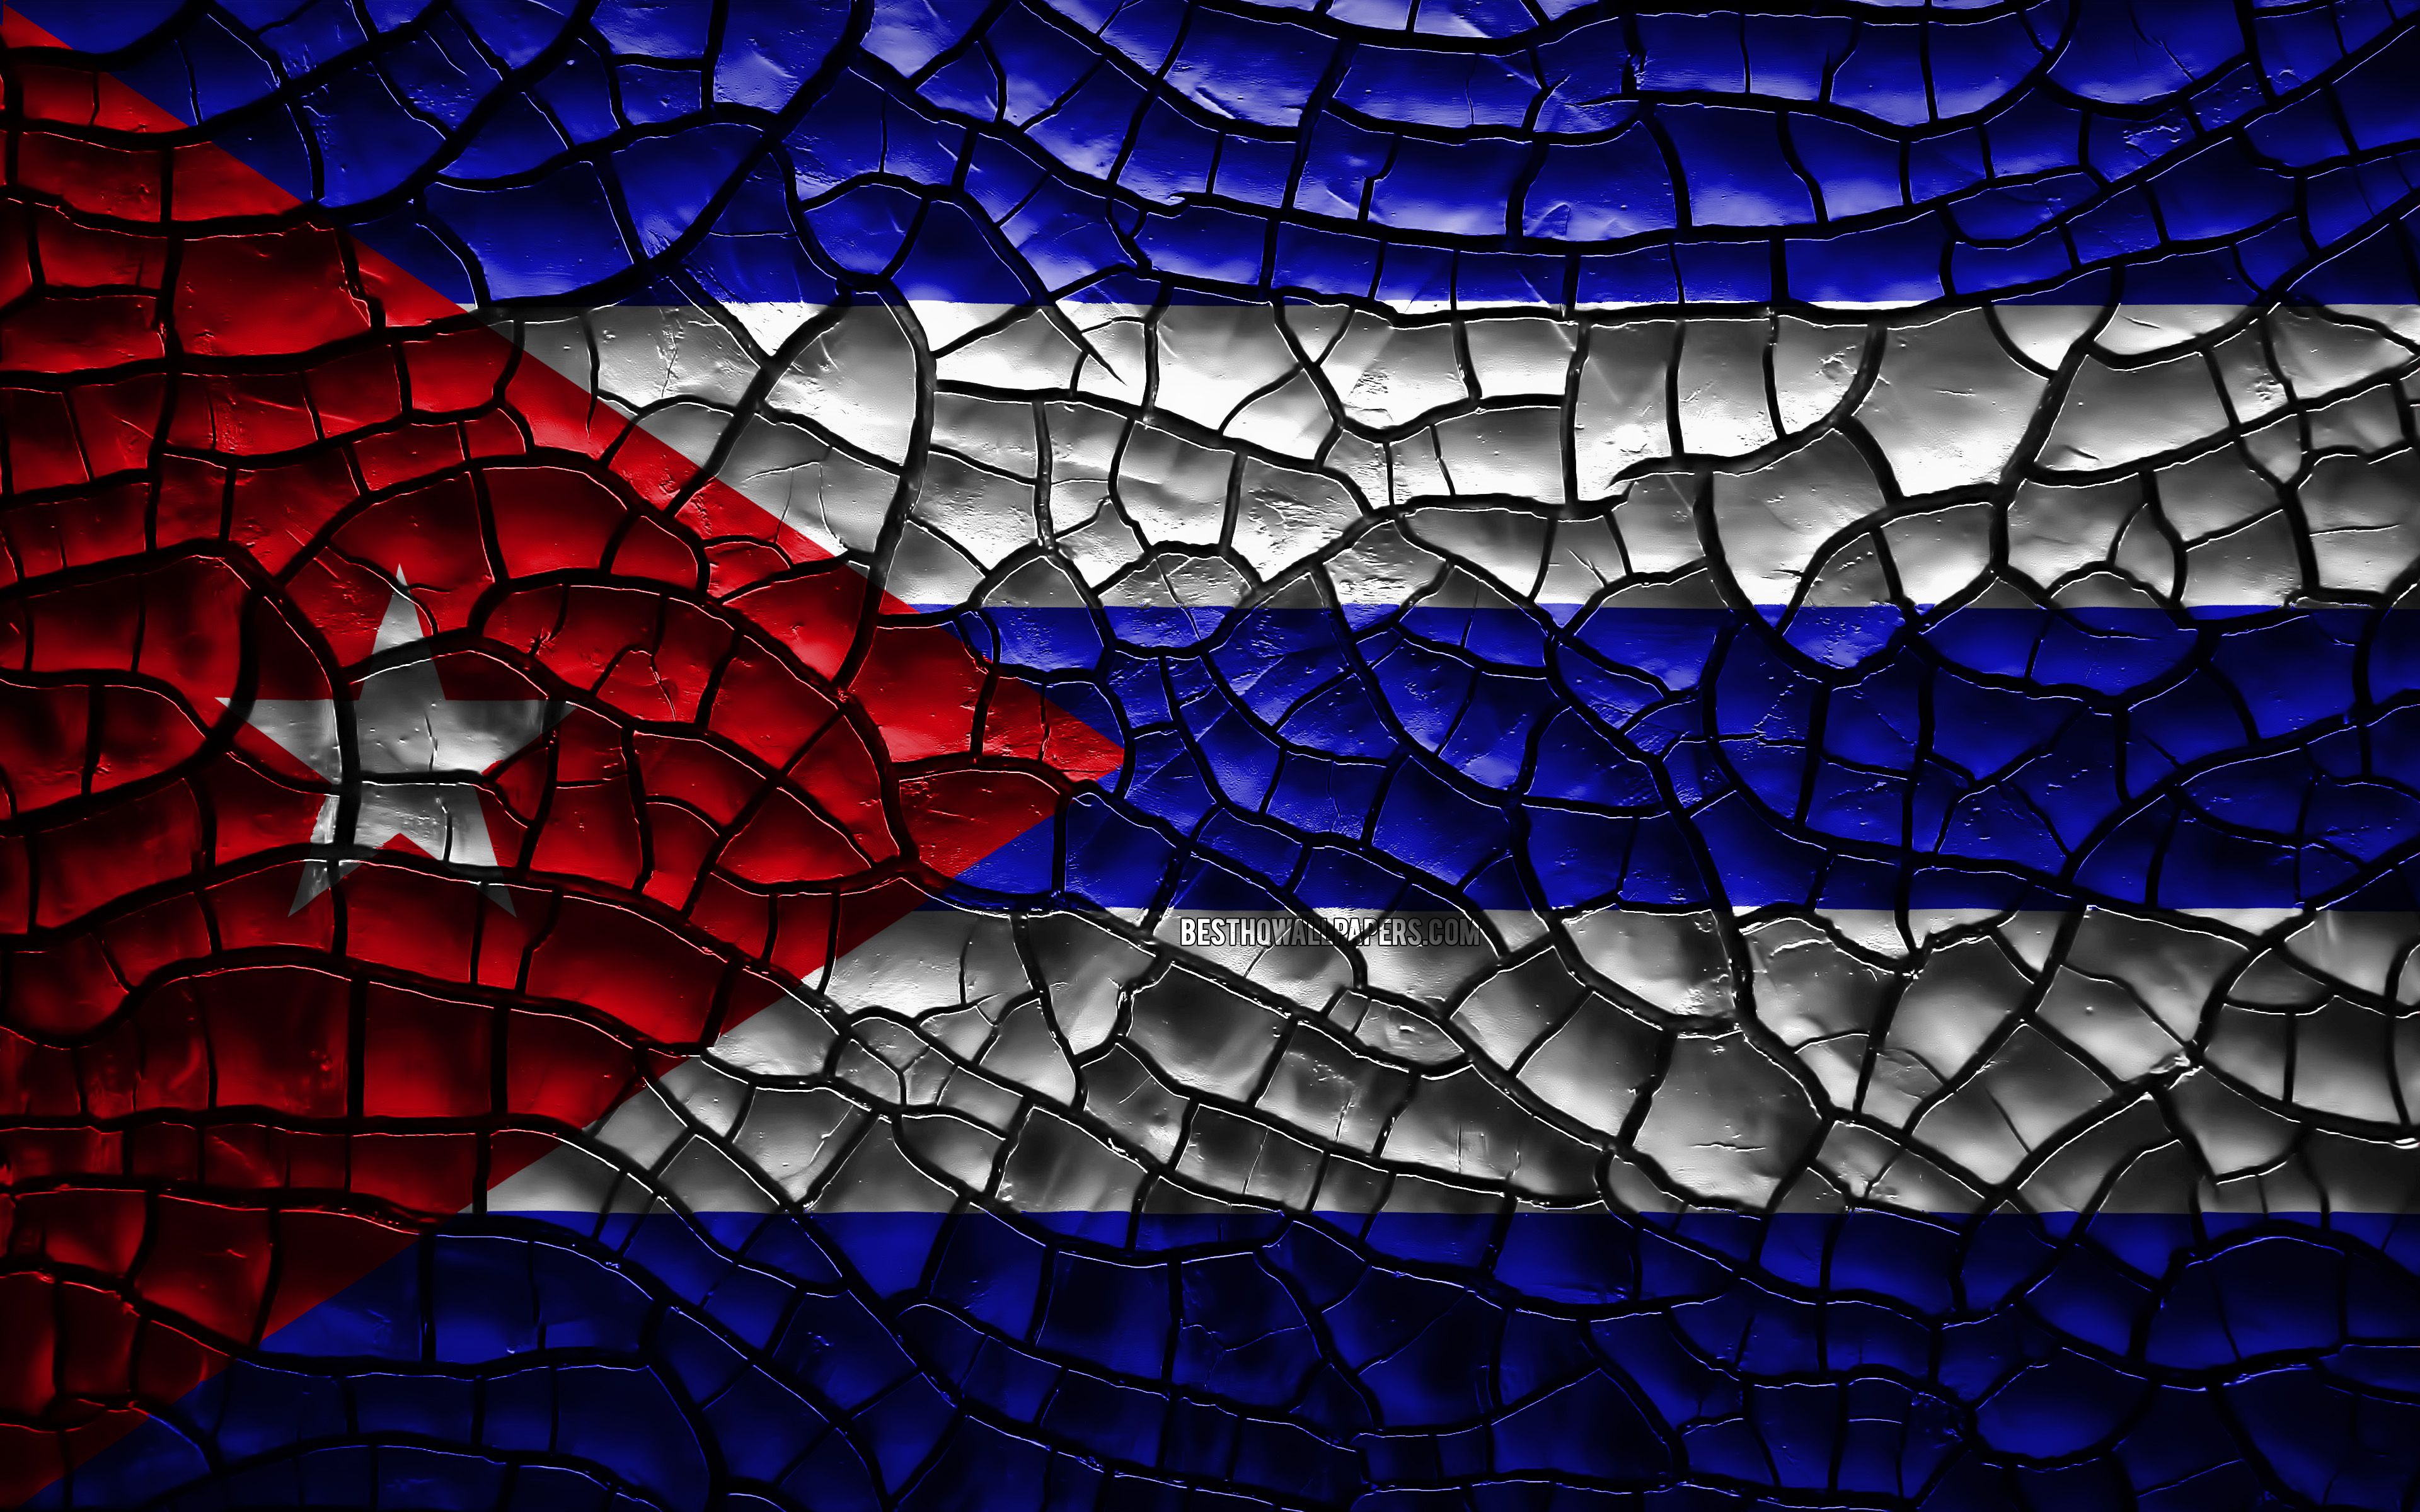 Download wallpaper Flag of Cuba, 4k, cracked soil, North America, Cuban flag, 3D art, Cuba, North American countries, national symbols, Cuba 3D flag for desktop with resolution 3840x2400. High Quality HD picture